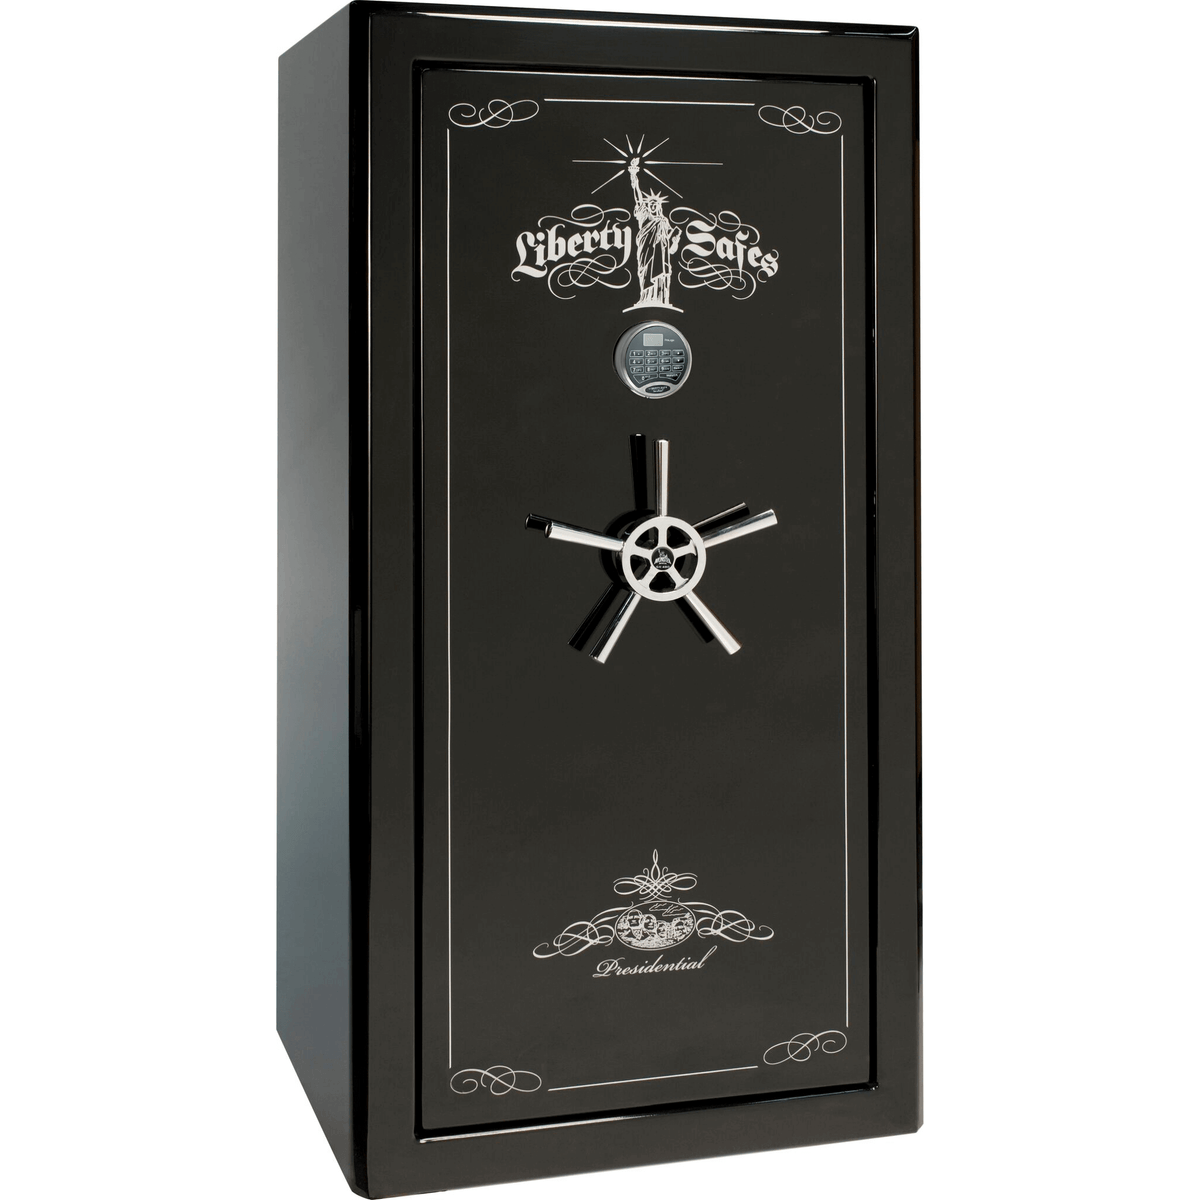 Liberty Safe Presidential 25 in Black Gloss with Chrome Electronic Lock, closed door.